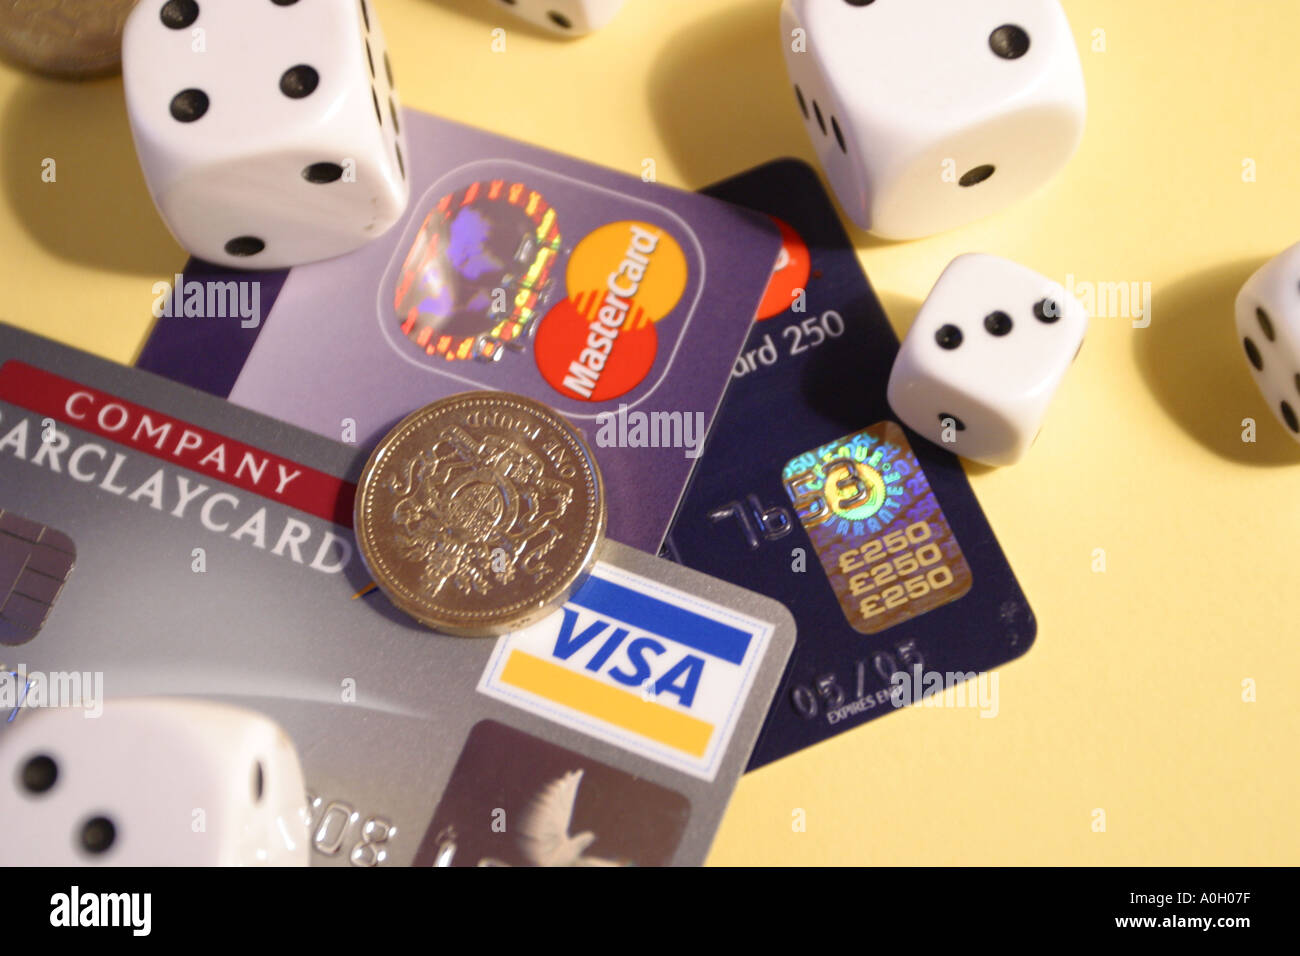 Financial risk gamble credit cards money and dice Stock Photo